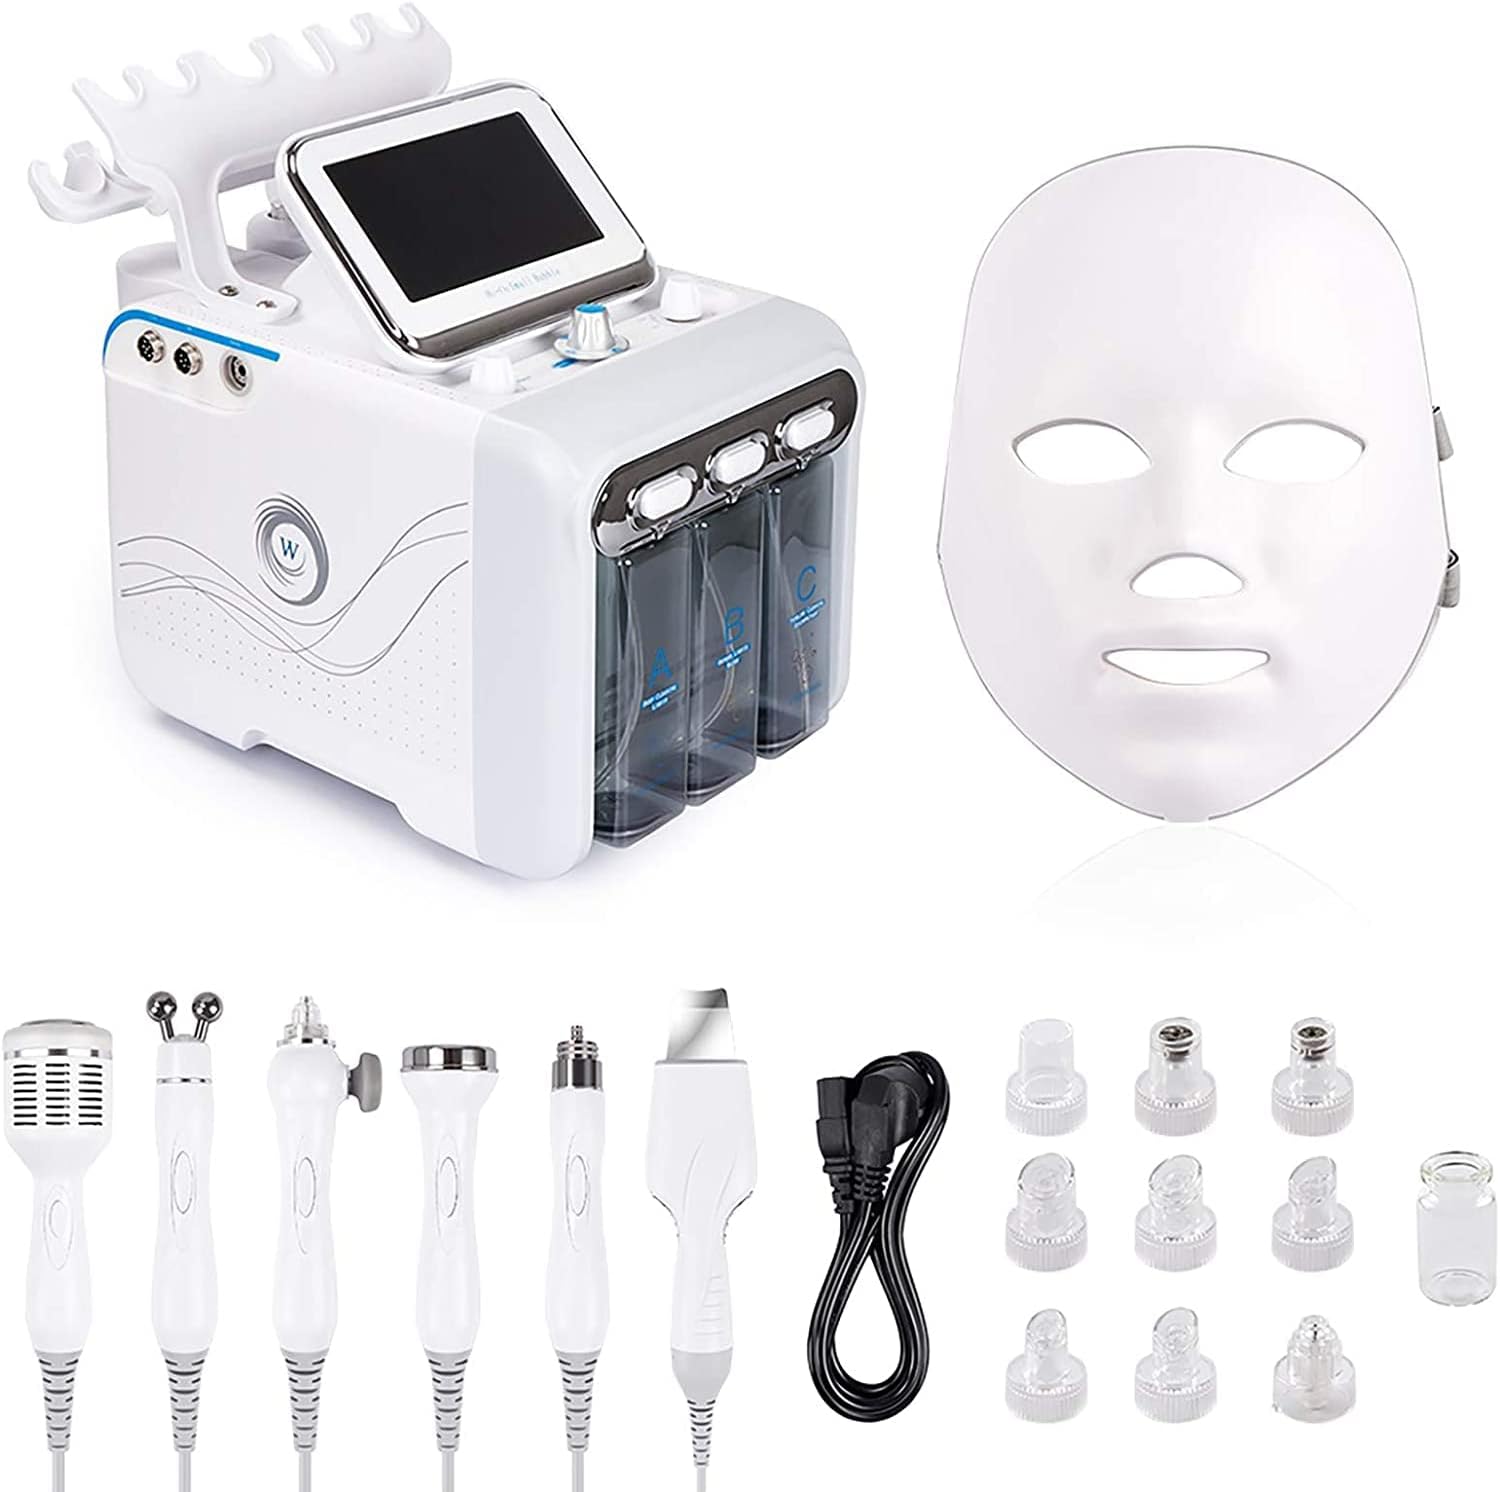 QHYAH 7 in 1 Multifunctional Hydro Oxygen Machine Review